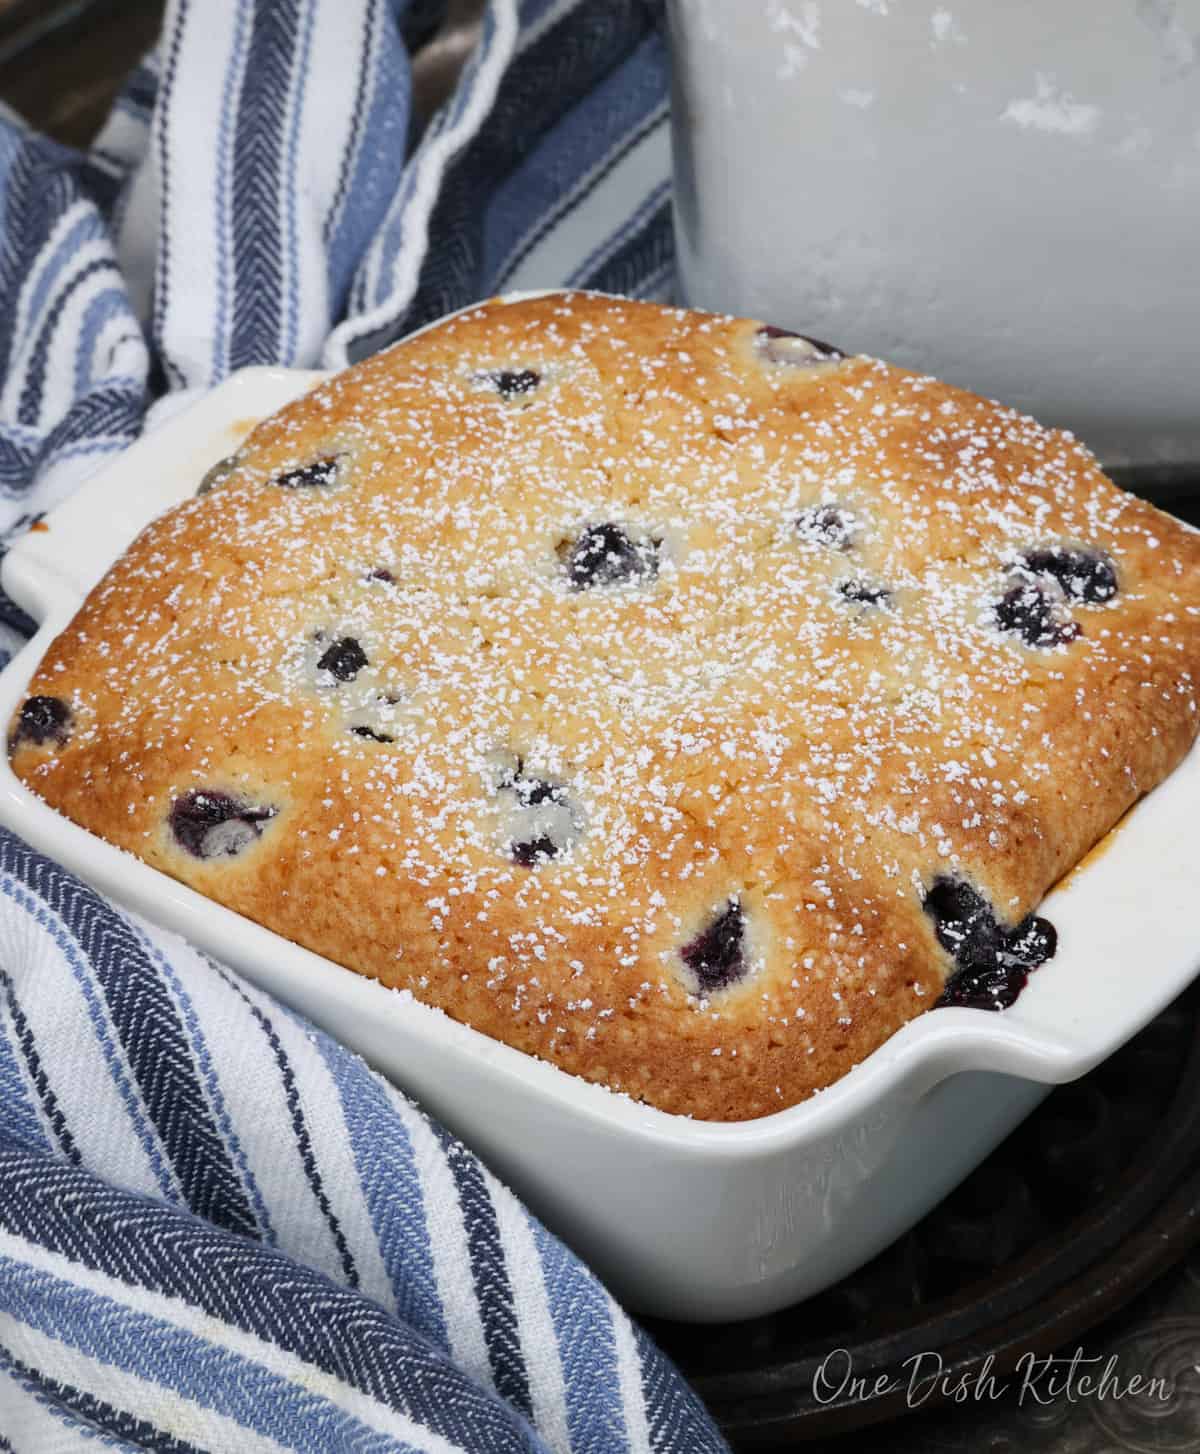 a small blueberry cake in a white baking dish on a silver tray next to a blue and white napkin.